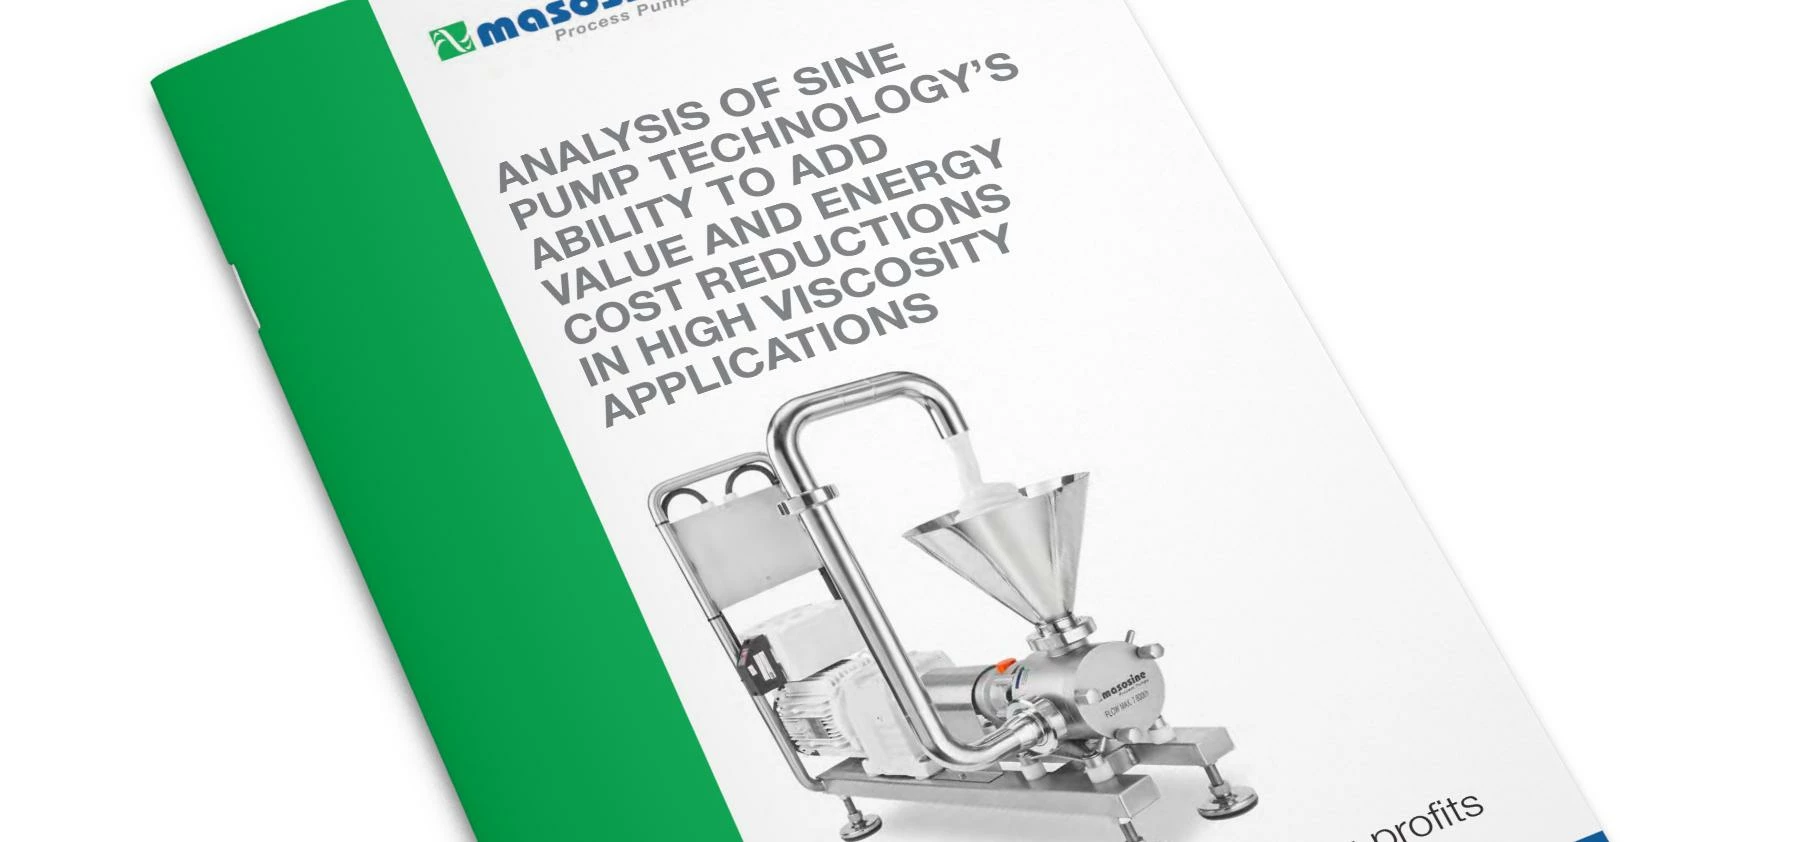 White paper proves SineTM pump energy benefits for process/engineering plants.